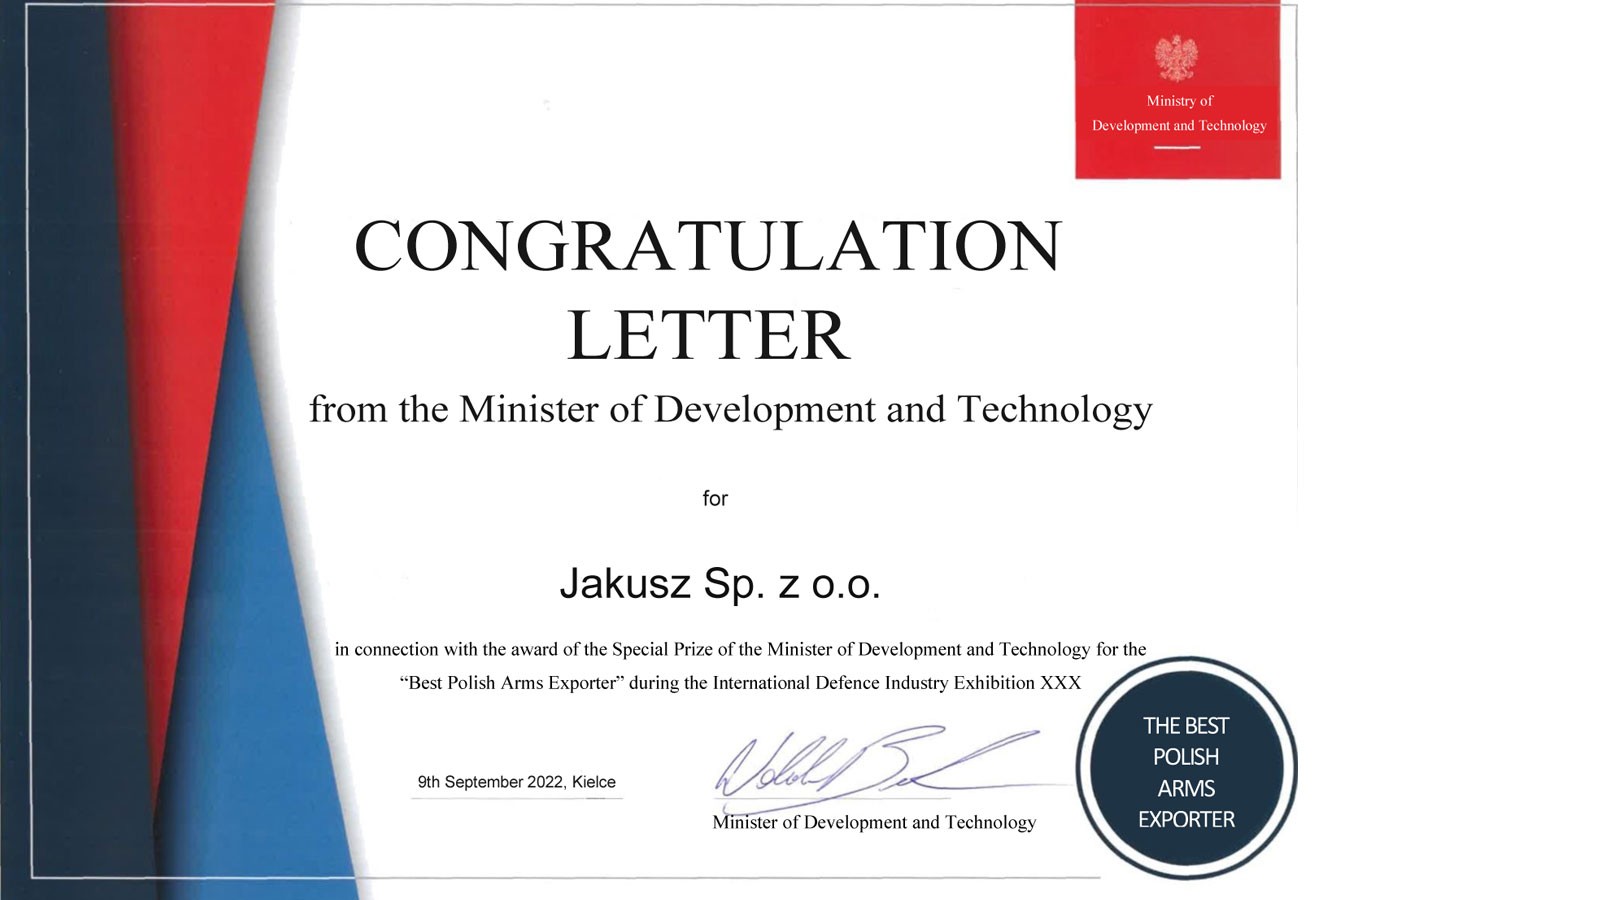 Special Award from the Minister of Development and Technology